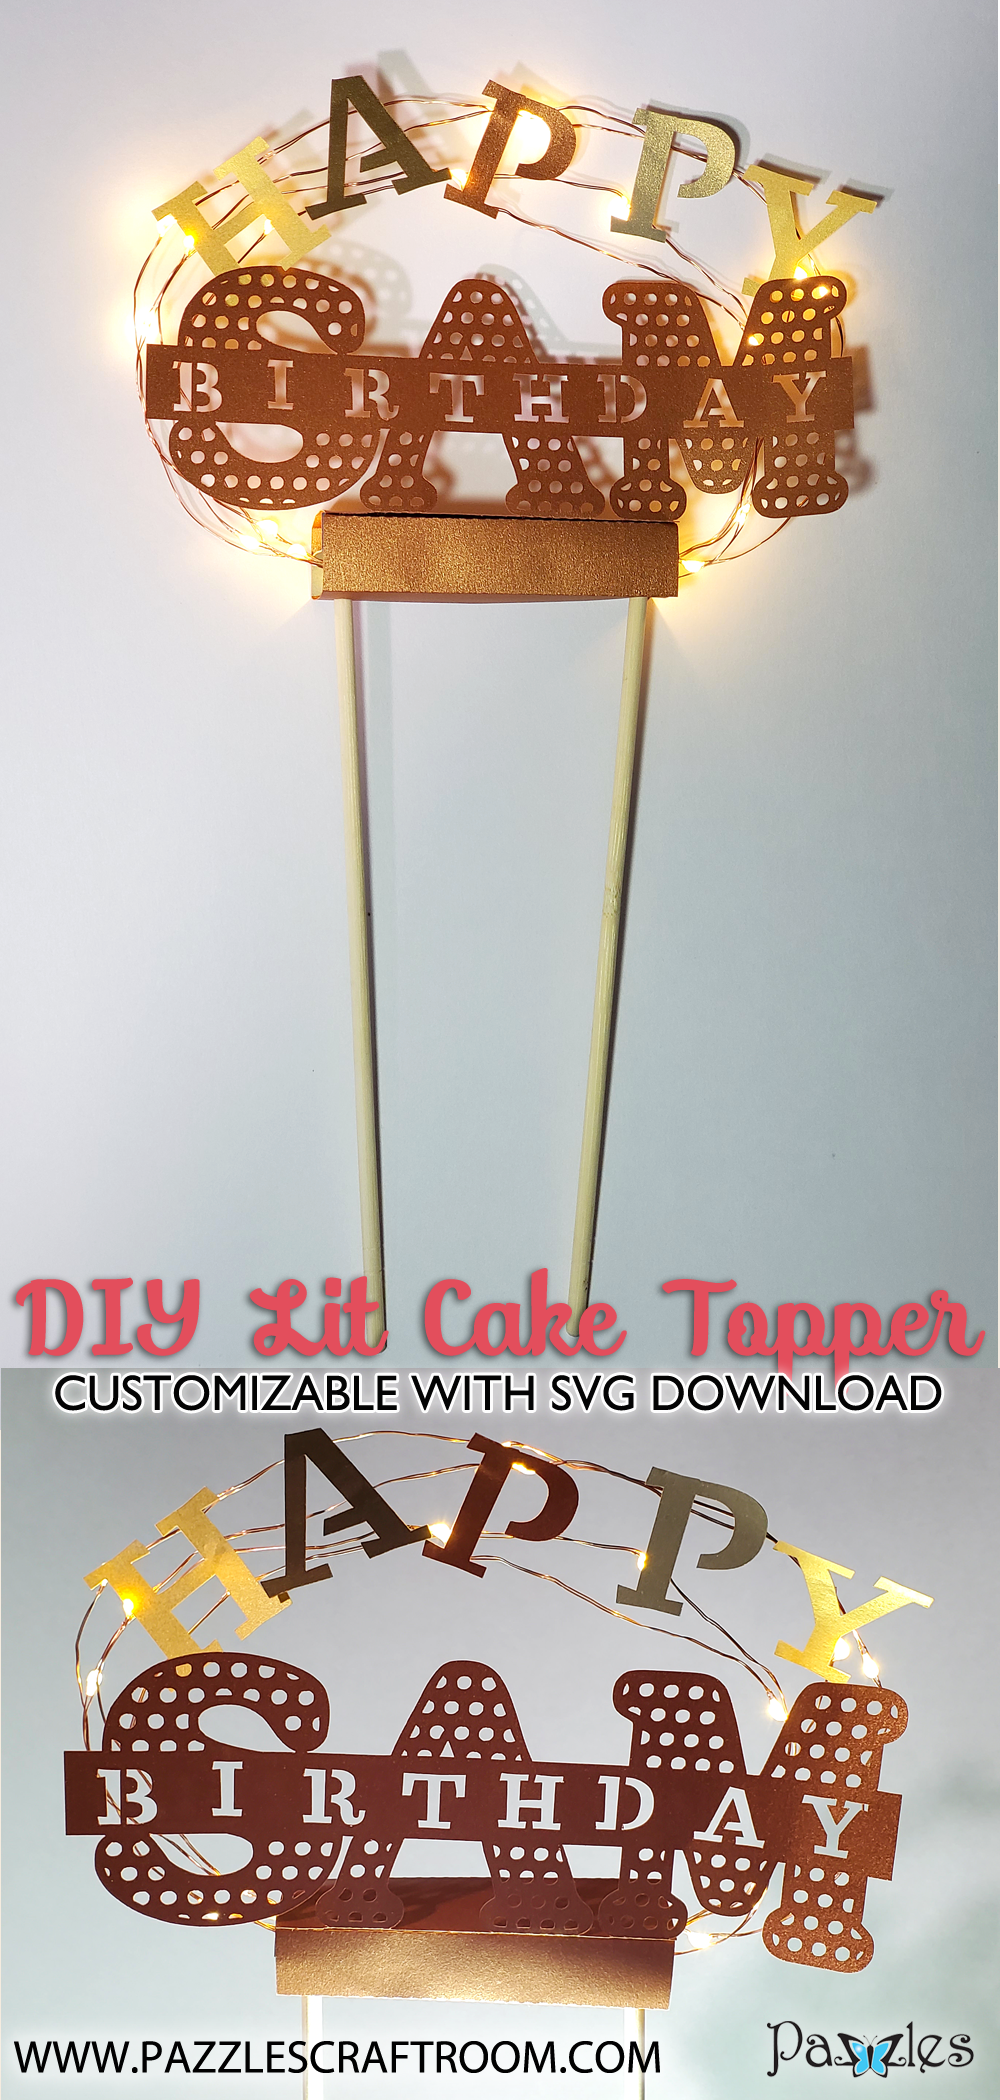 Pazzles DIY Customizable Lighted Cake Topper with SVG download. Compatible with all major electronic cutters including Pazzles Inspiration, Cricut, and SIlhoeutte Cameo. Design by Renee Smart.